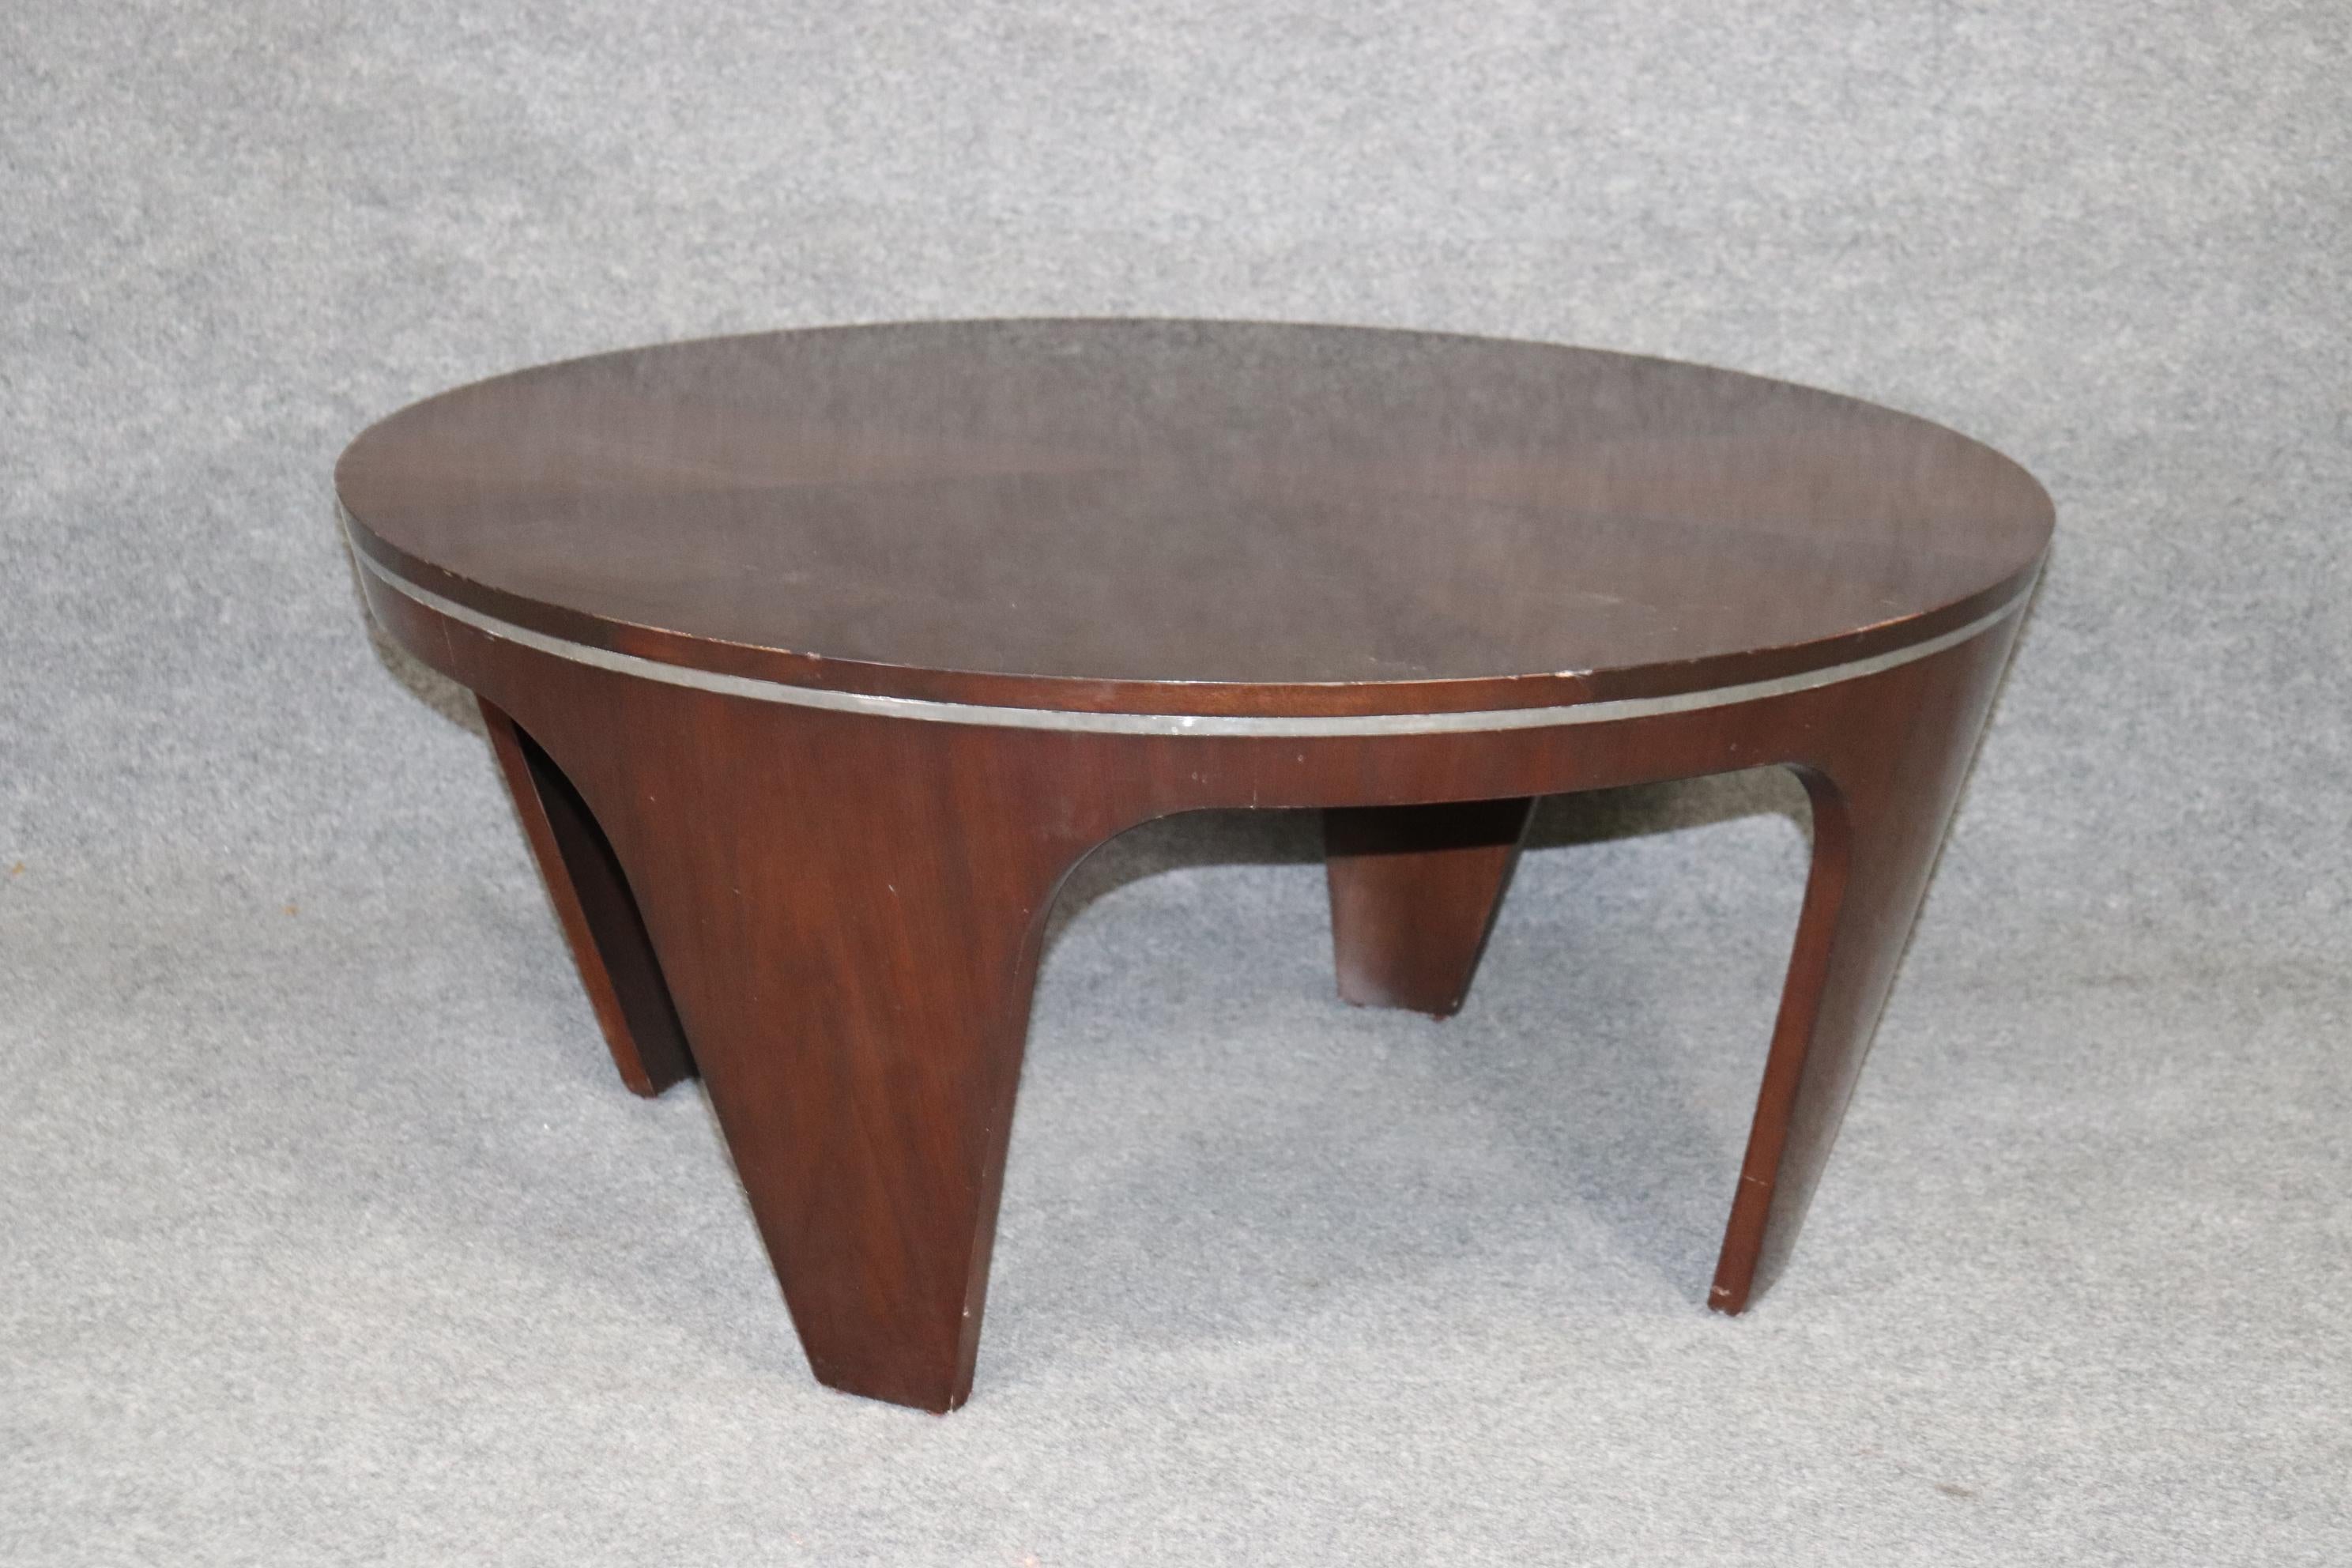 This is a unique art deco inspried coffee table in the style of Pierre Cardin. The table is figured mahogany with a band of some form of metal that surrounds it. The table will be cleaned and polished to make it look its best. The table measures 42